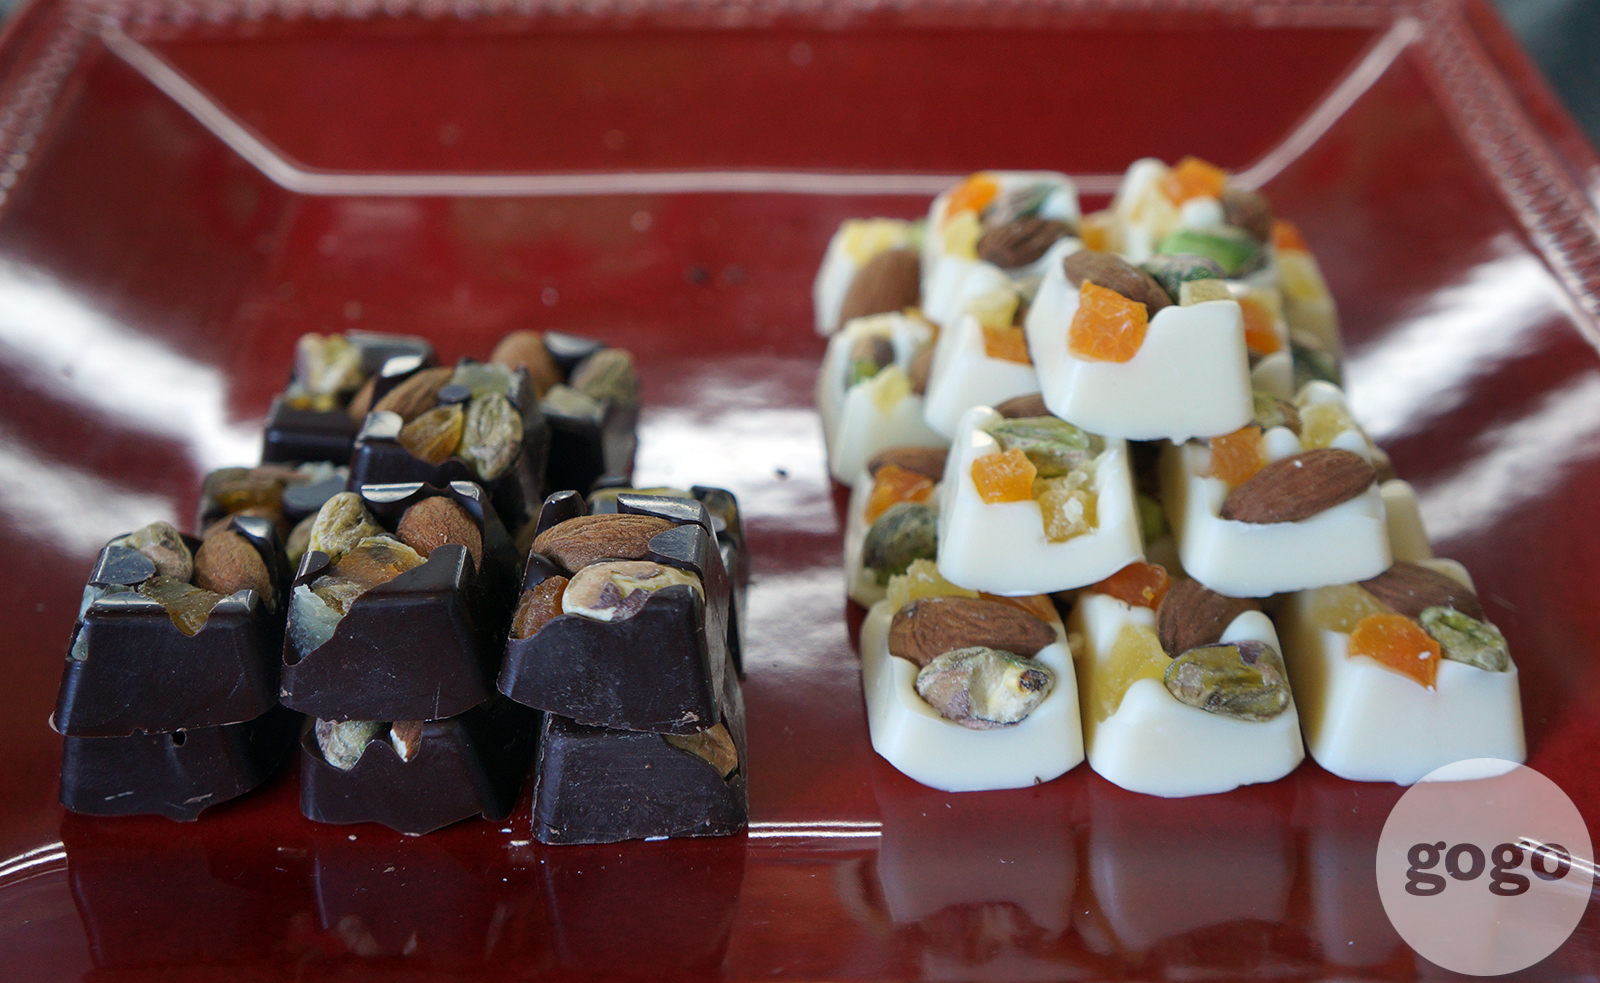 Chocolate with nut and dried fruits